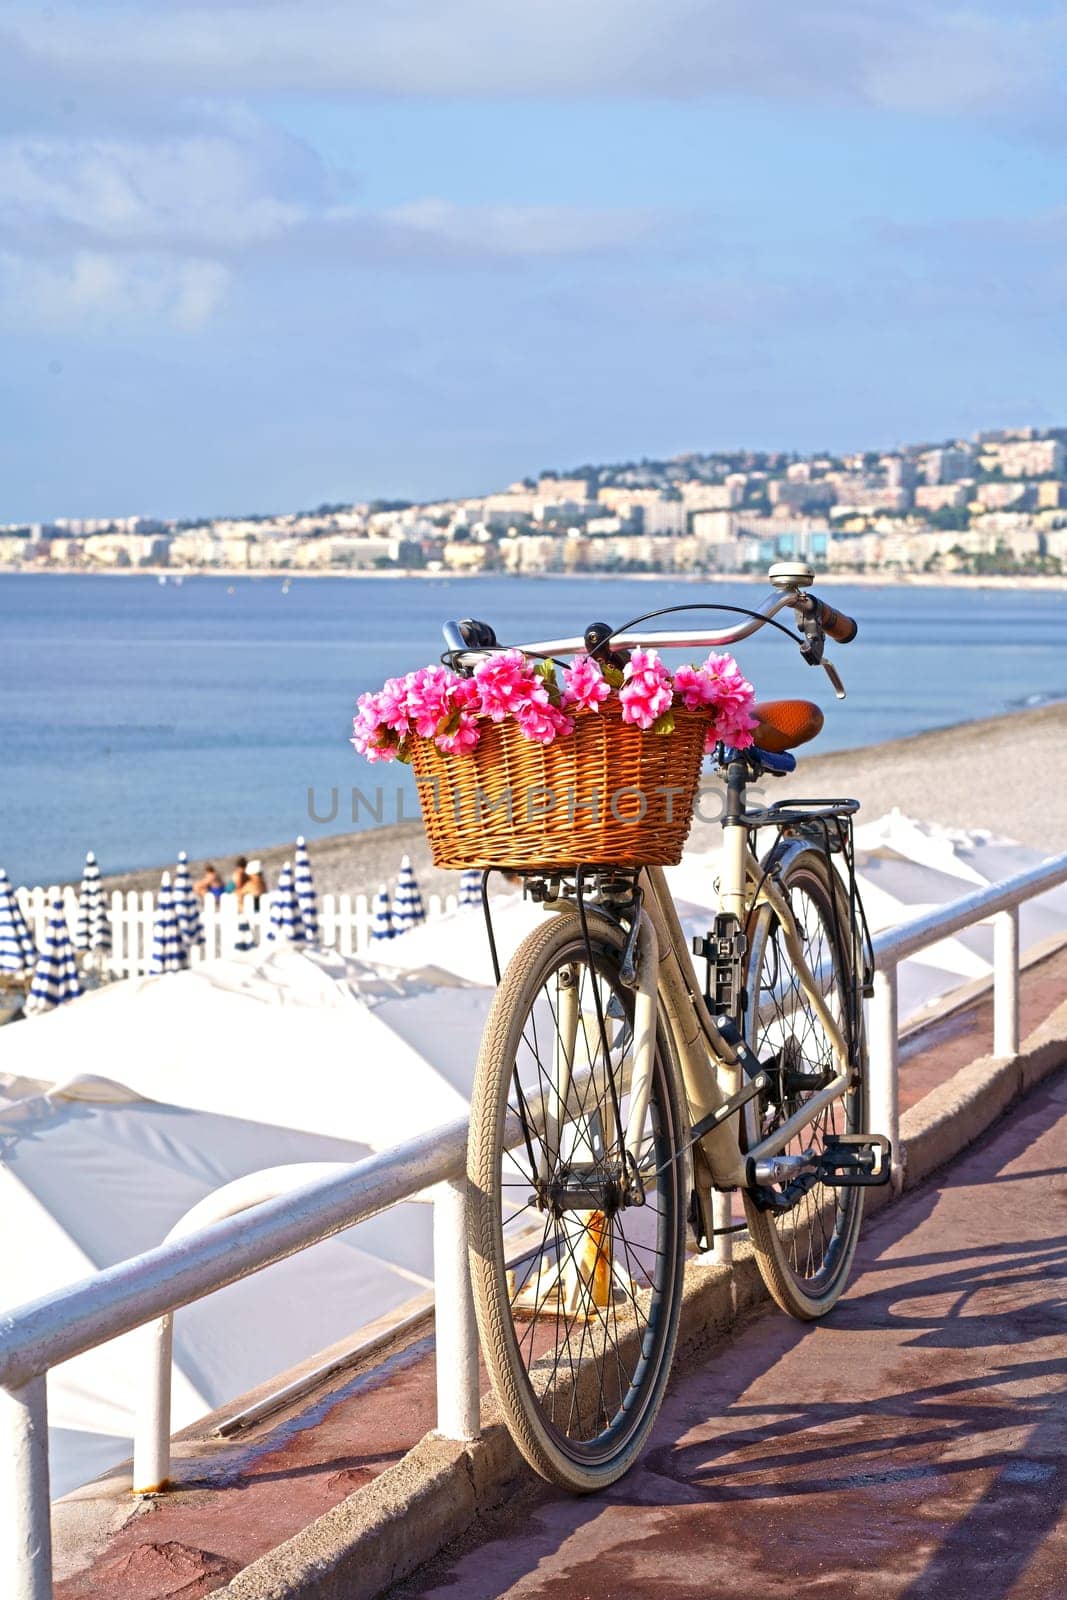 France. Nice. Bicycle with a beautiful basket filled with pink flowers in front of the sea by aprilphoto